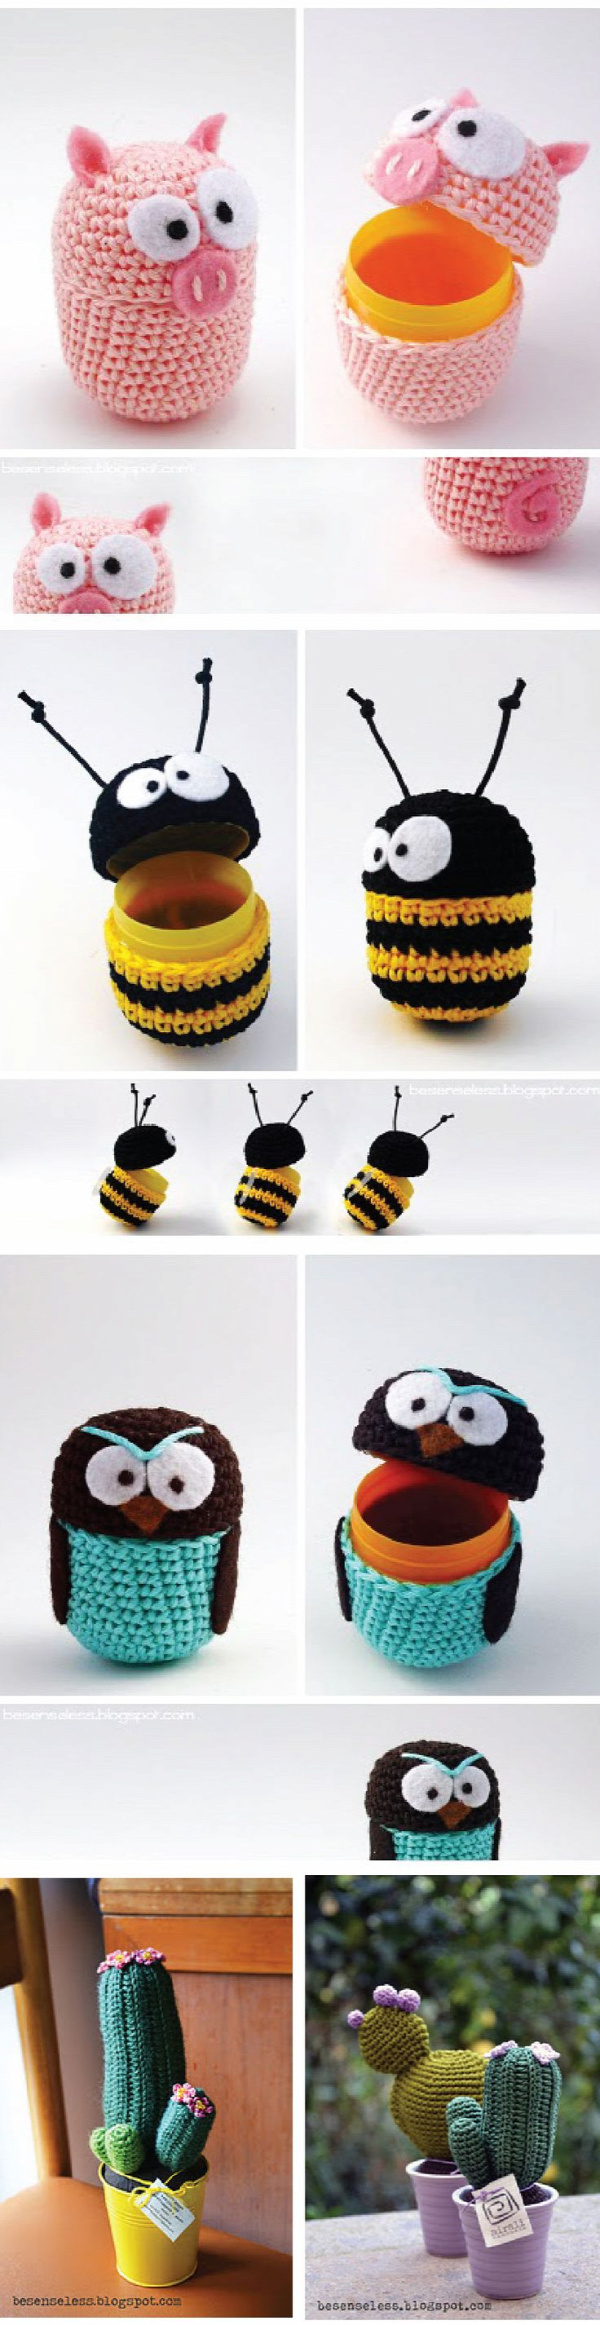 Who knits? I need these in my life. https://besenseless.blogspot.com/2011/05/tutorial-ovetti-amigurumi.html Easter clipart ideas